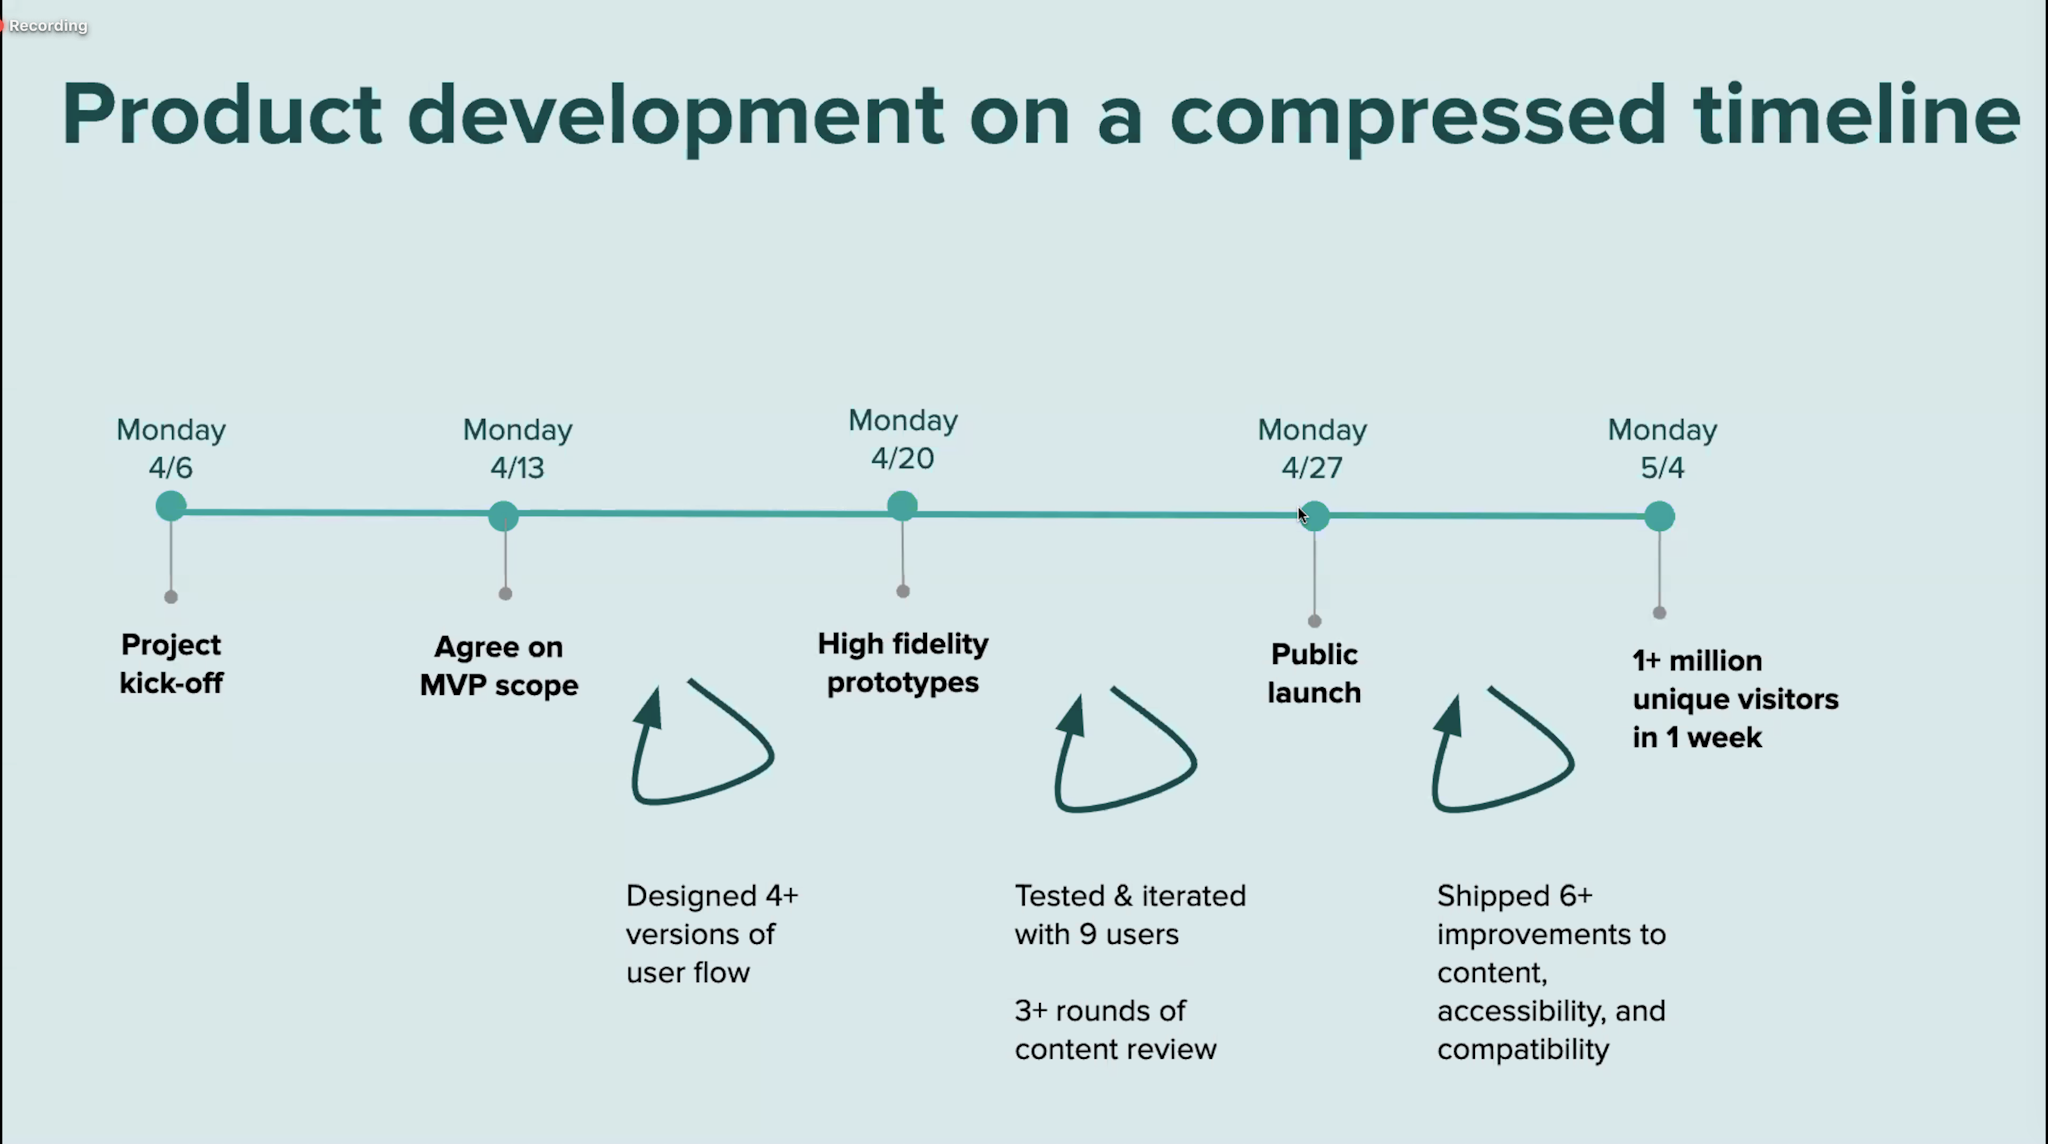 Timeline showing the month long product development schedule on a compressed timeline. Steps go from project kick-off, to agreeing on MVP scope, to high fidelity prototypes, to public launch, to tracking performance. 